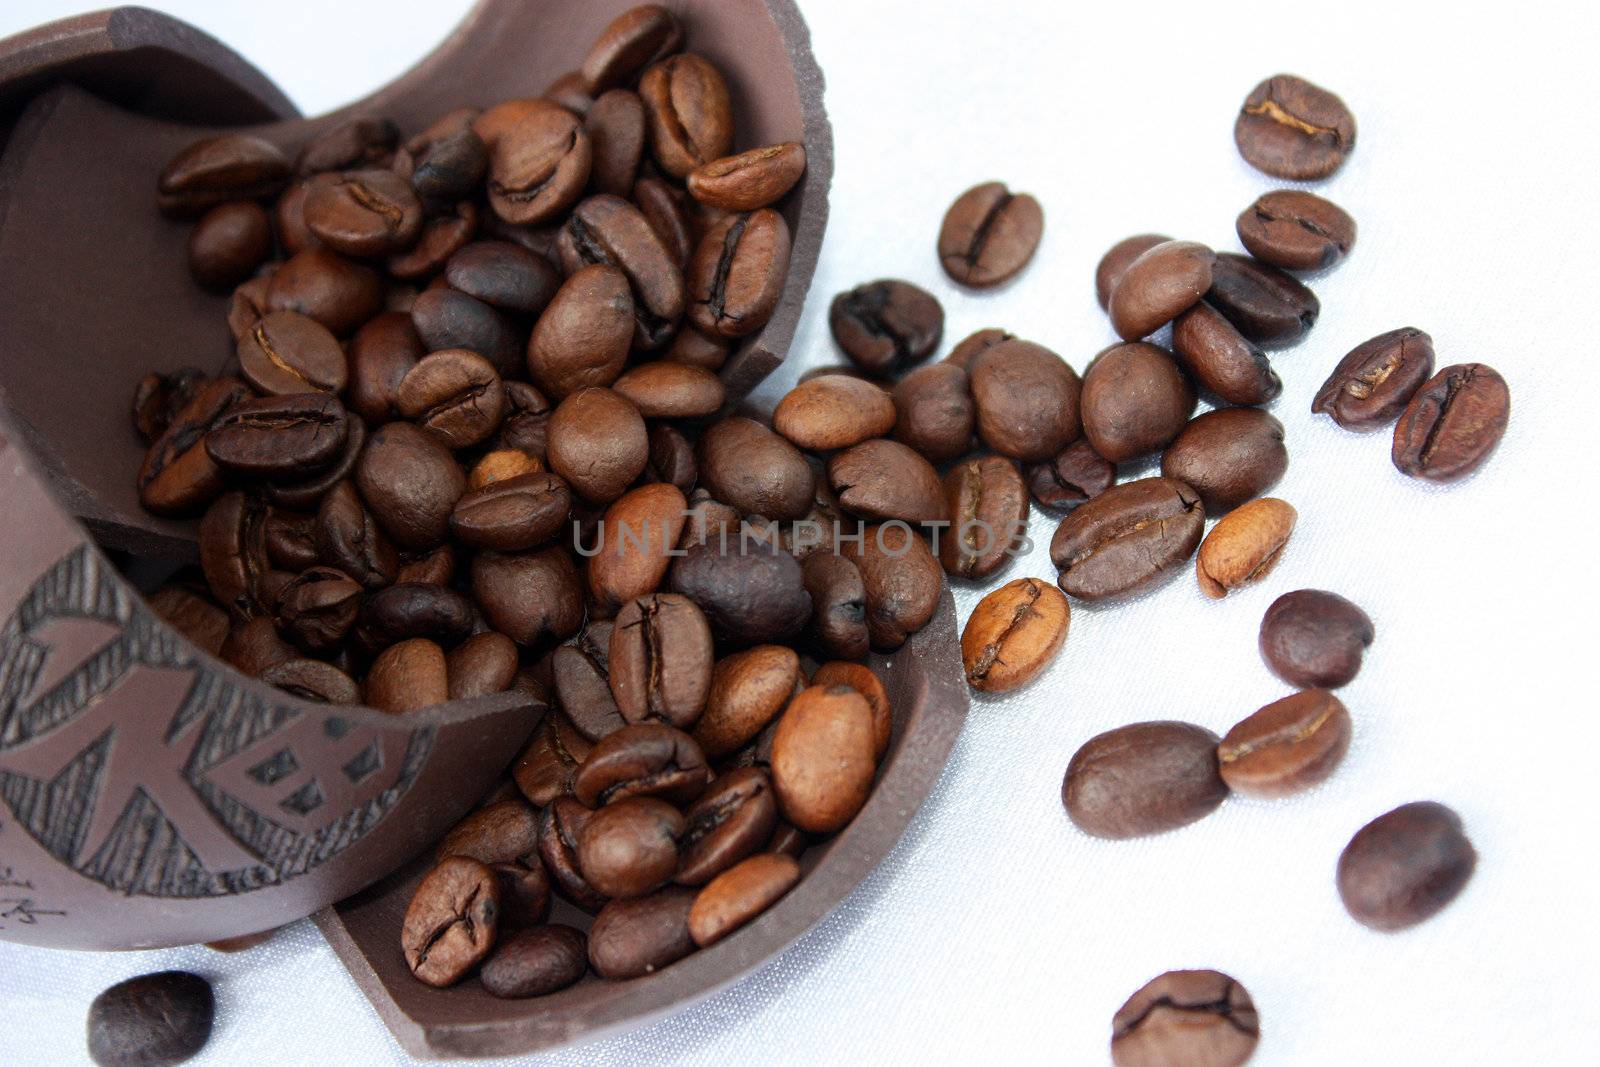 fresh coffee beans, roasted corn, fresh and fragrant coffee beans, this coffee